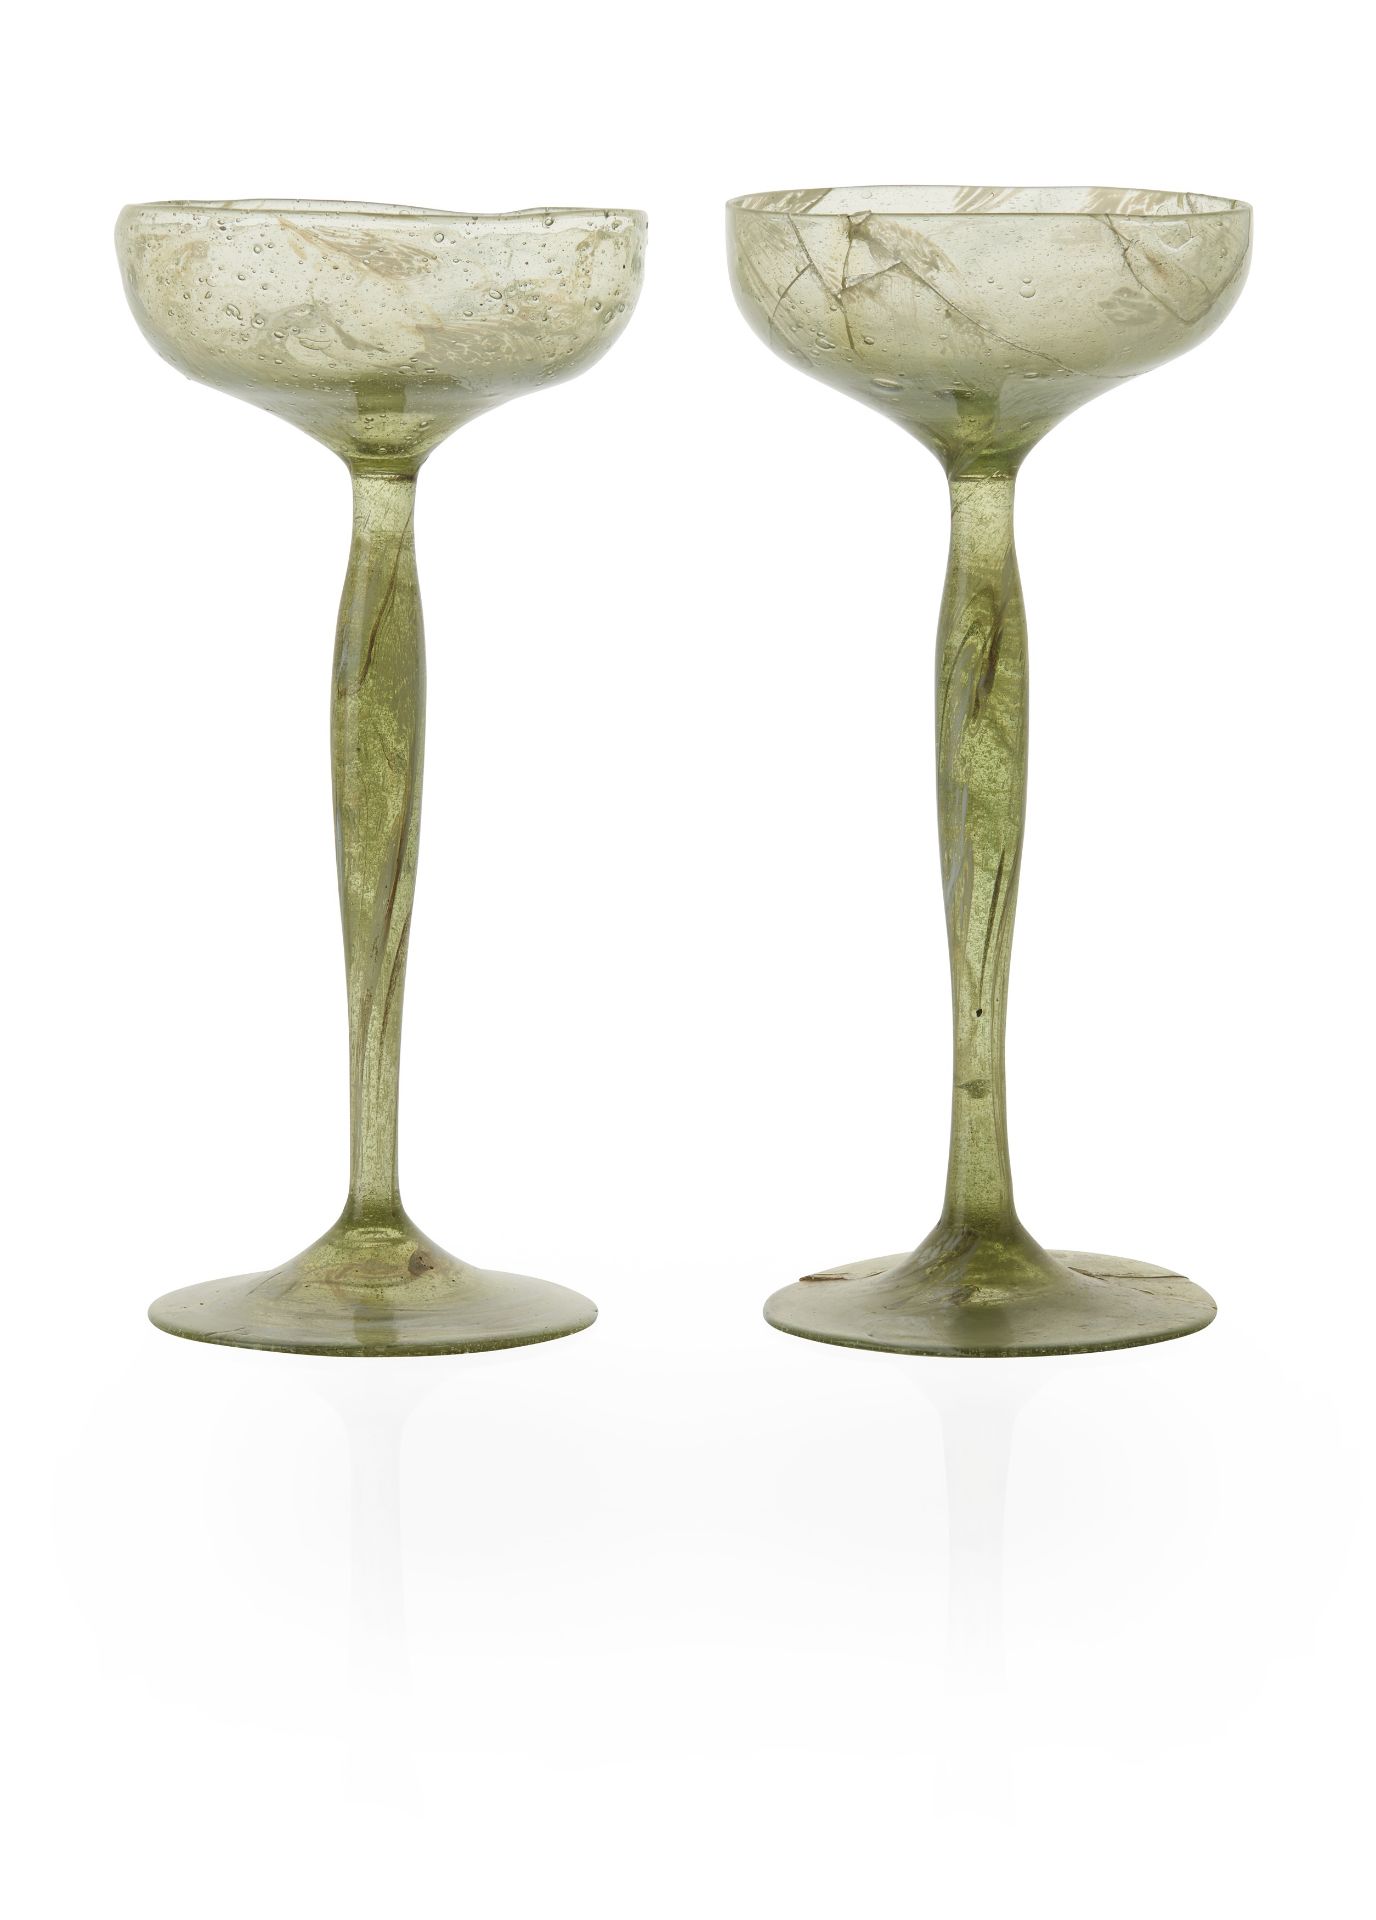 JAMES COUPER & SONS, GLASGOW 'CLUTHA' CHAMPAGNE COUPE, CIRCA 1890